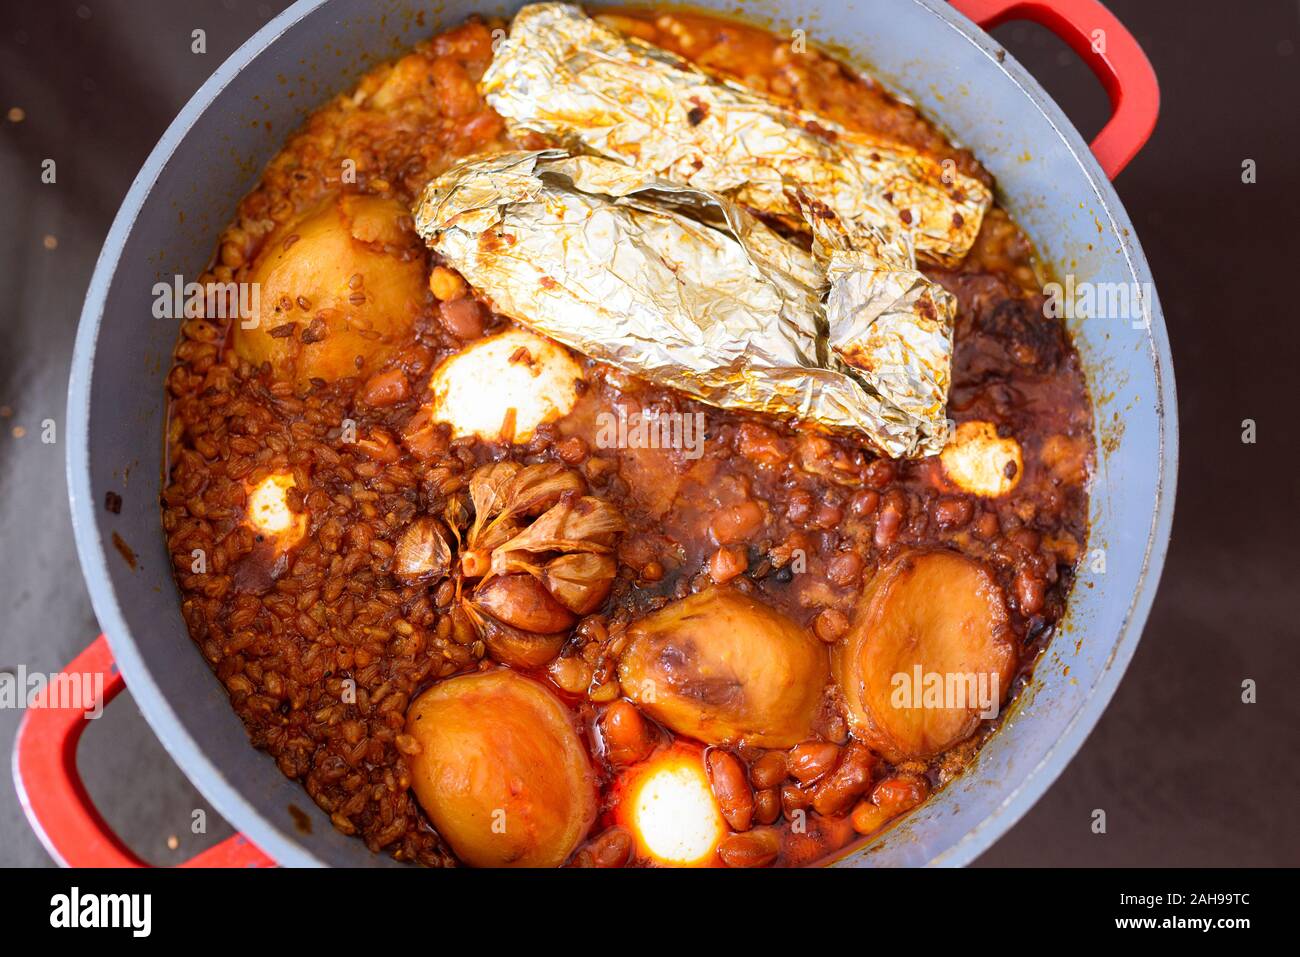 Shabbat Or Sabbath Traditional Food On The Hot Plate In The Kitchen Stock  Photo - Download Image Now - iStock